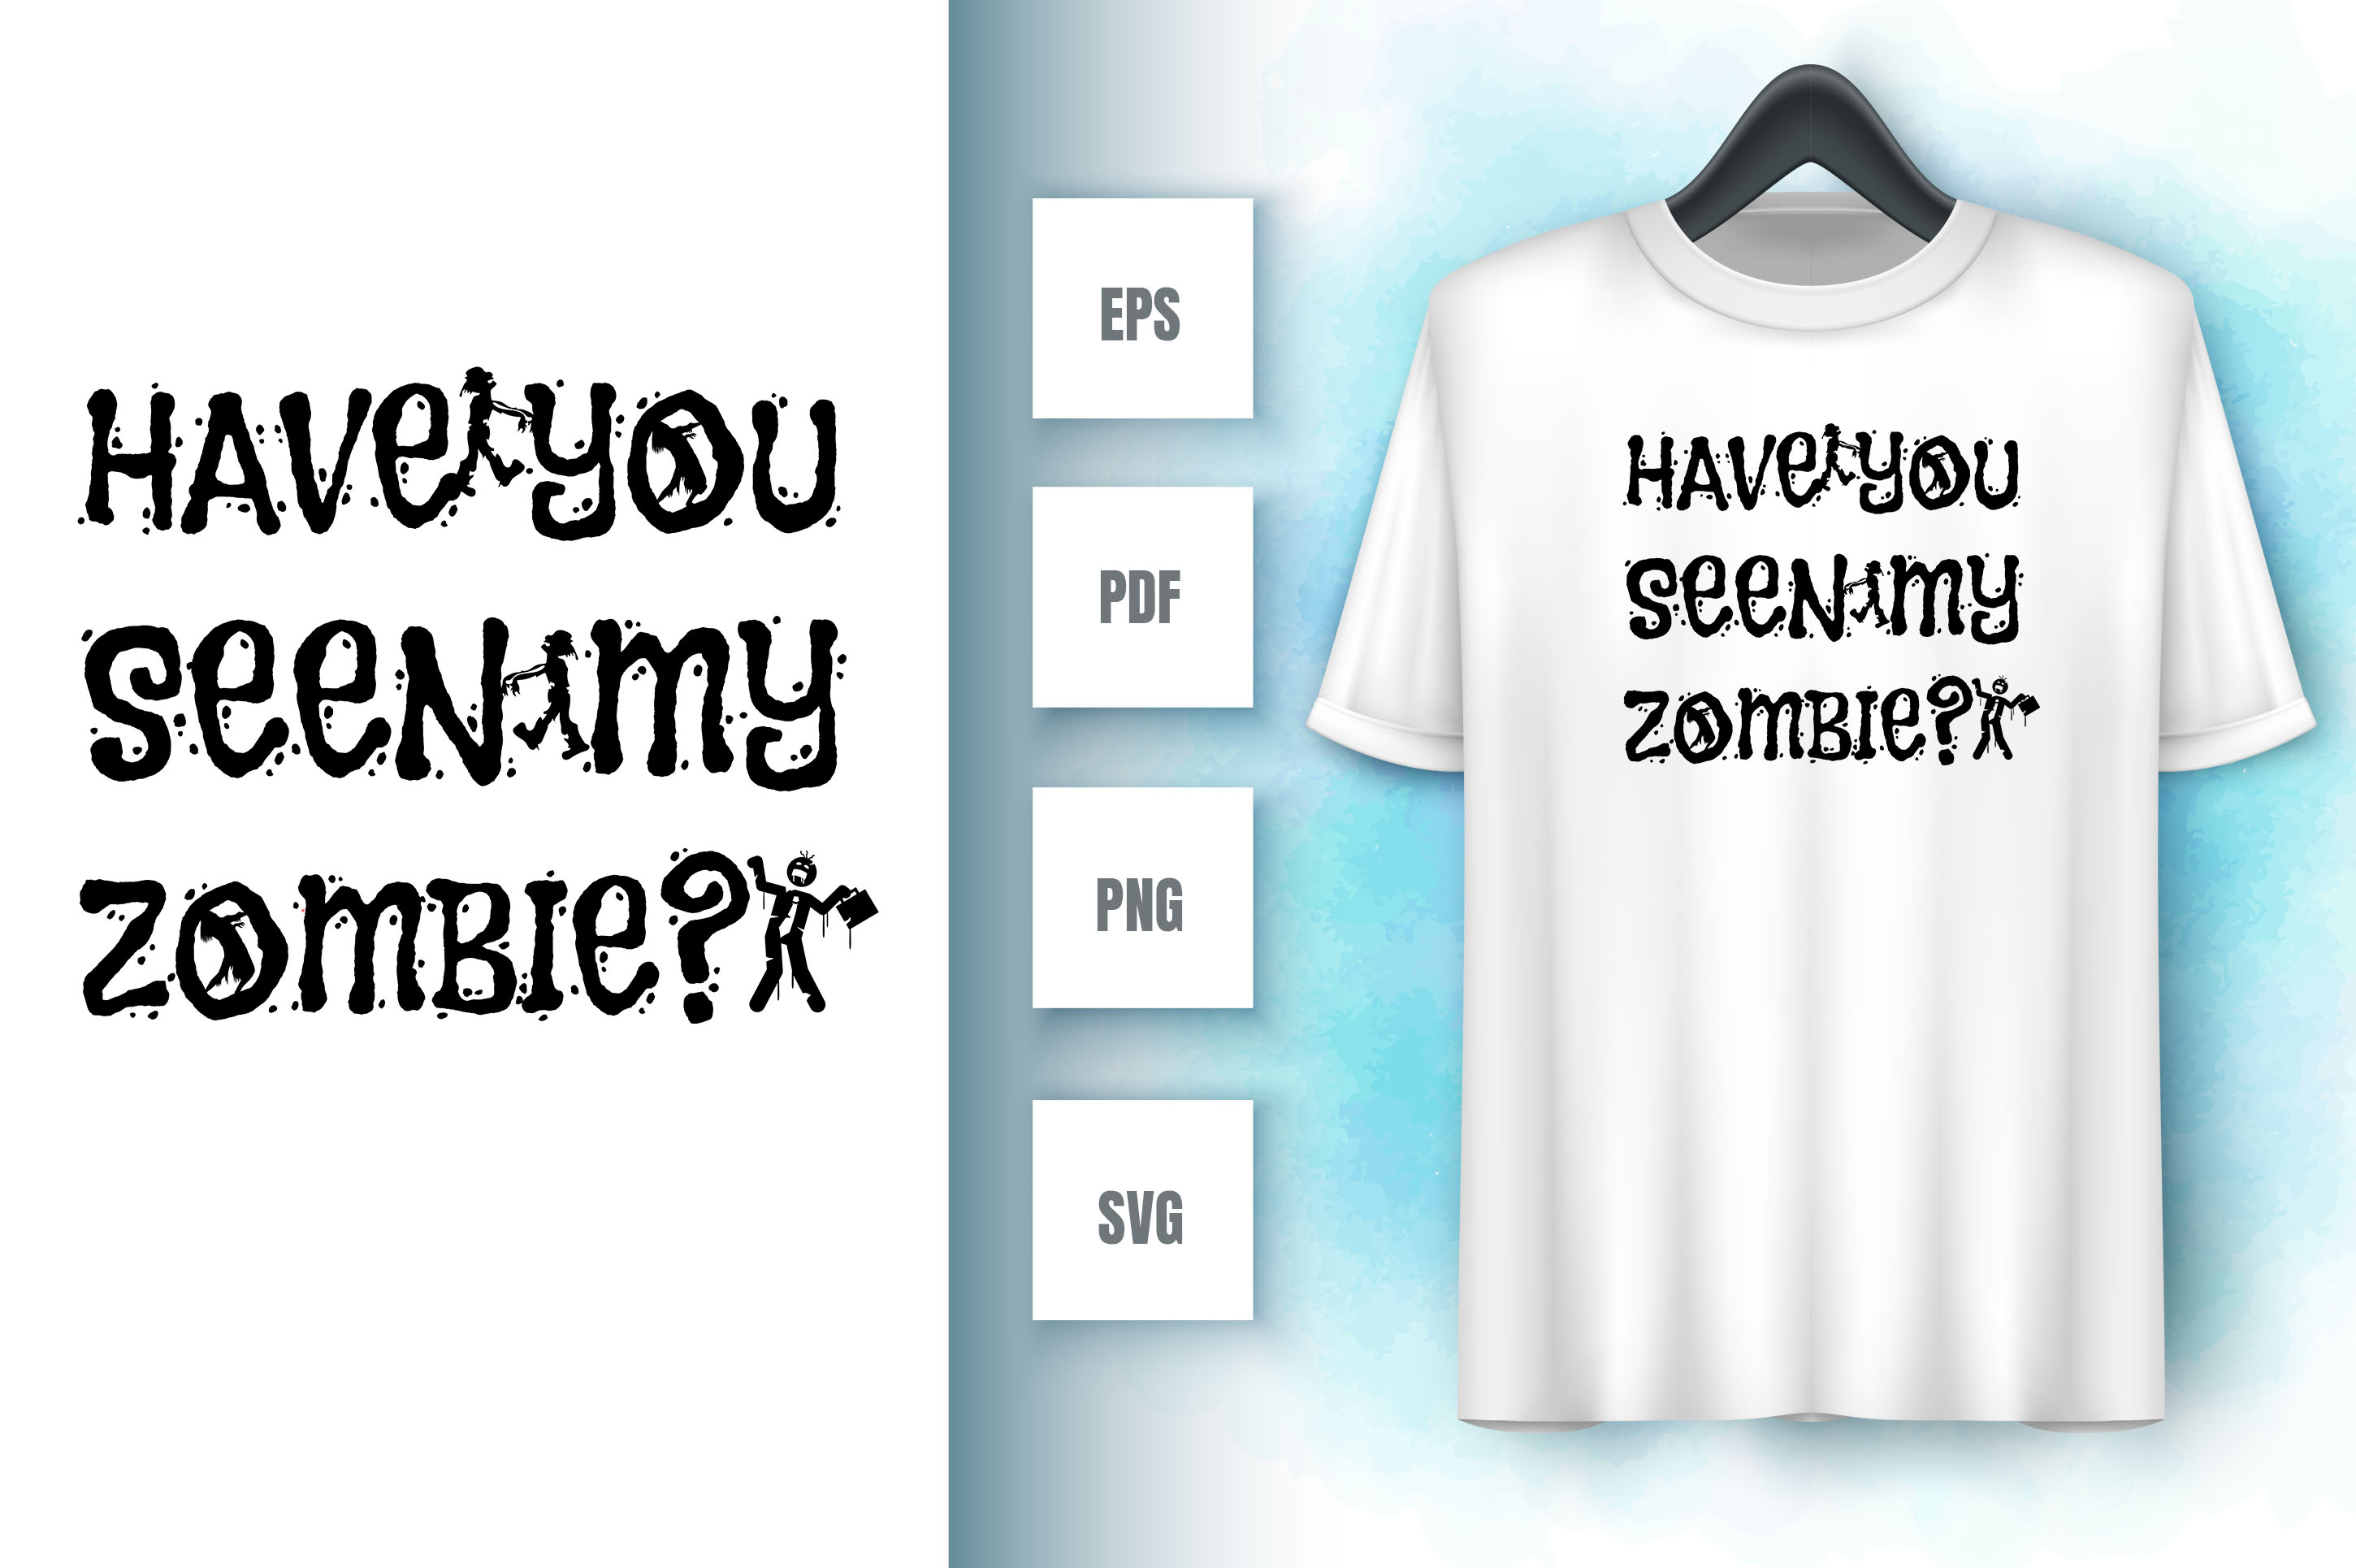 Image of a white t-shirt with an amazing inscription have you seen my zombie